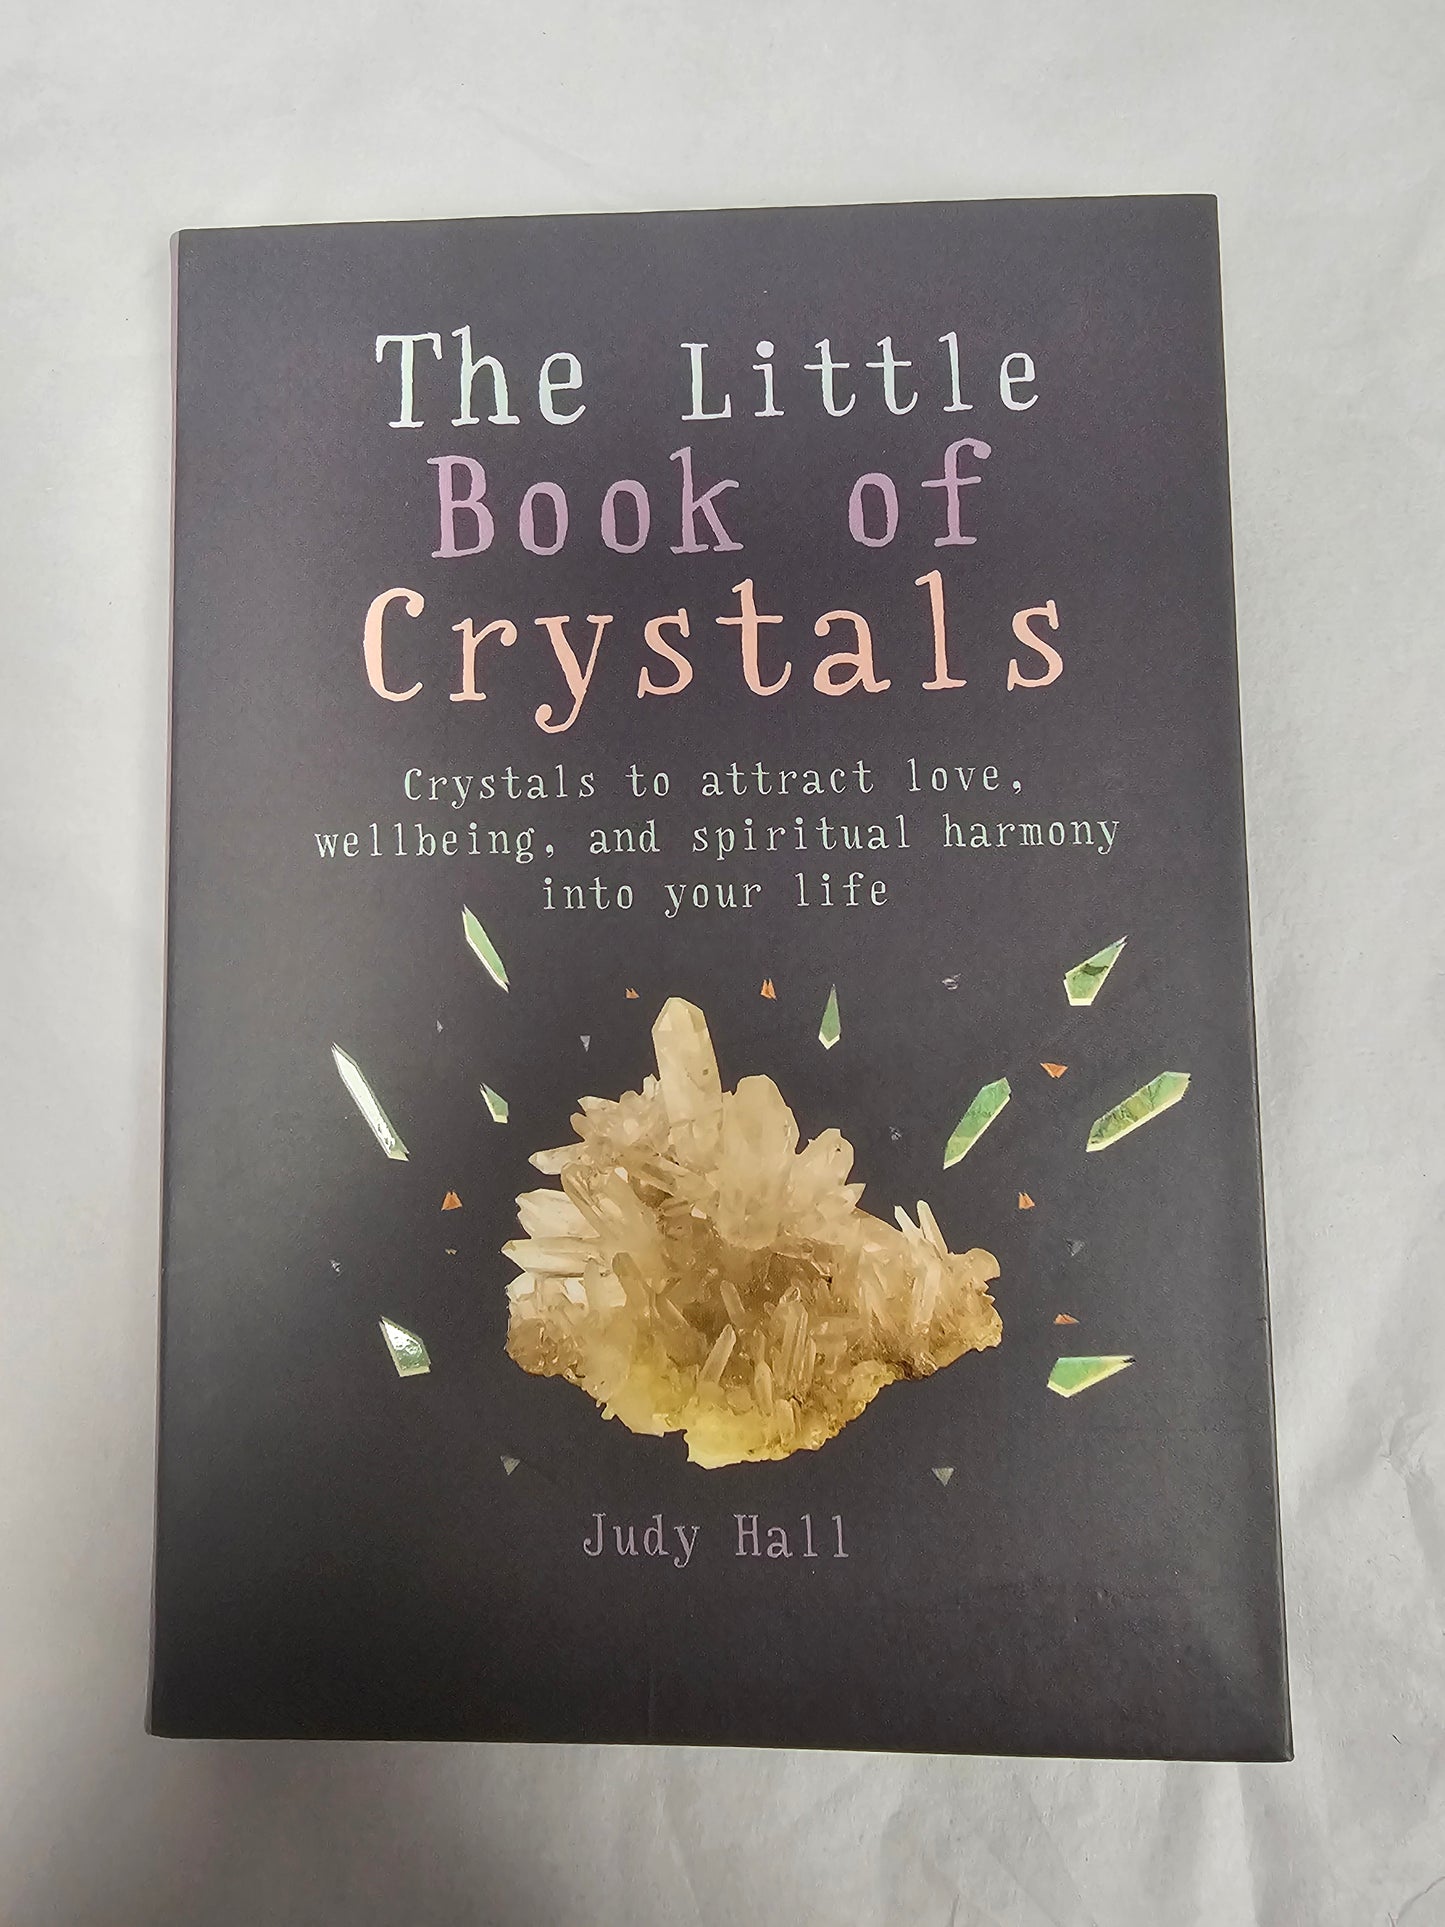 The little book of Crystal's